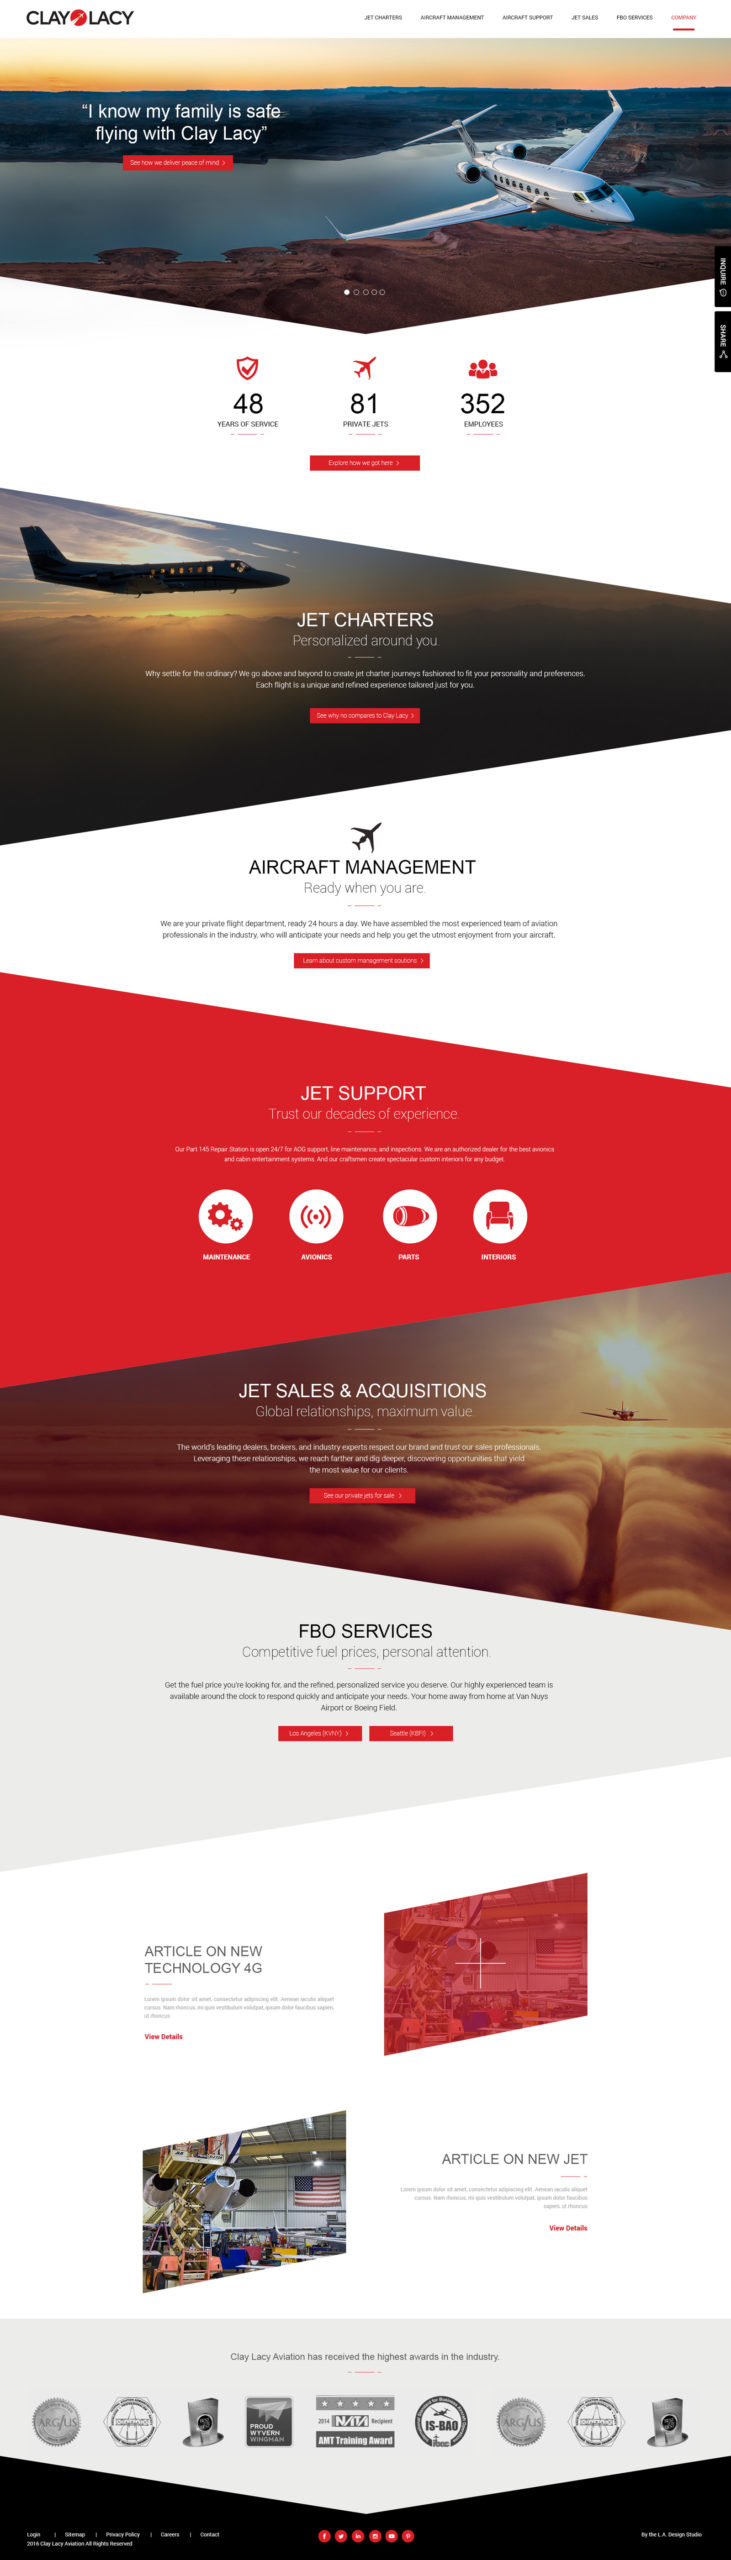 Clay Lacy Aviation Web Design